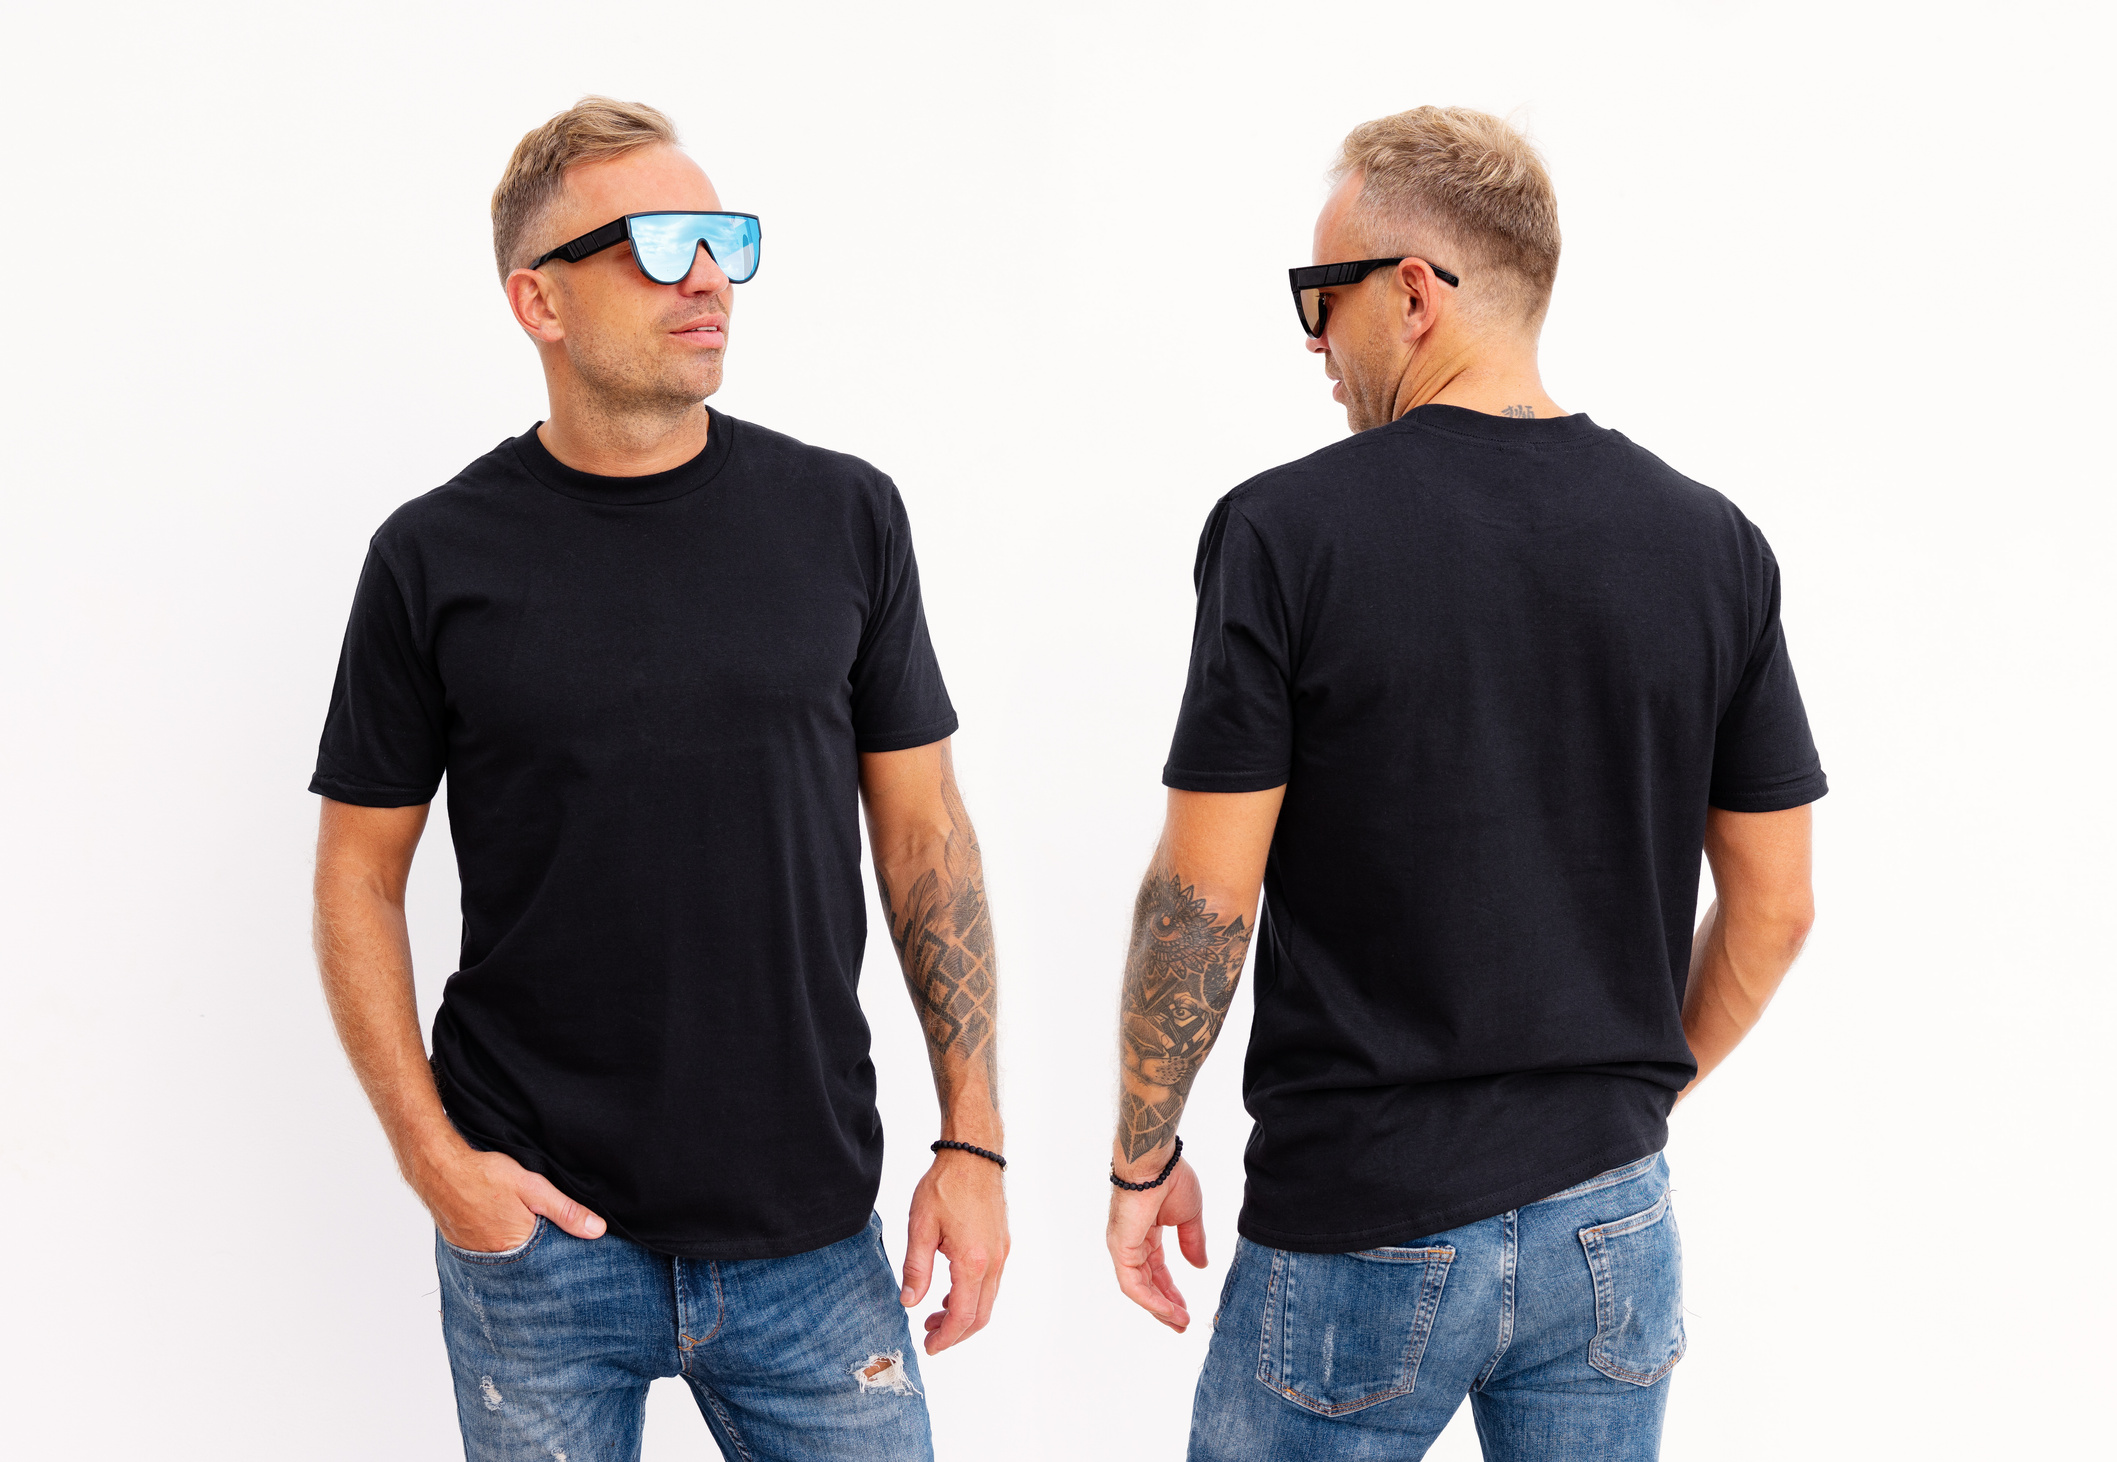 Man Wearing Black T-Shirt, Front and Back View, Mockup for T Shirt Design